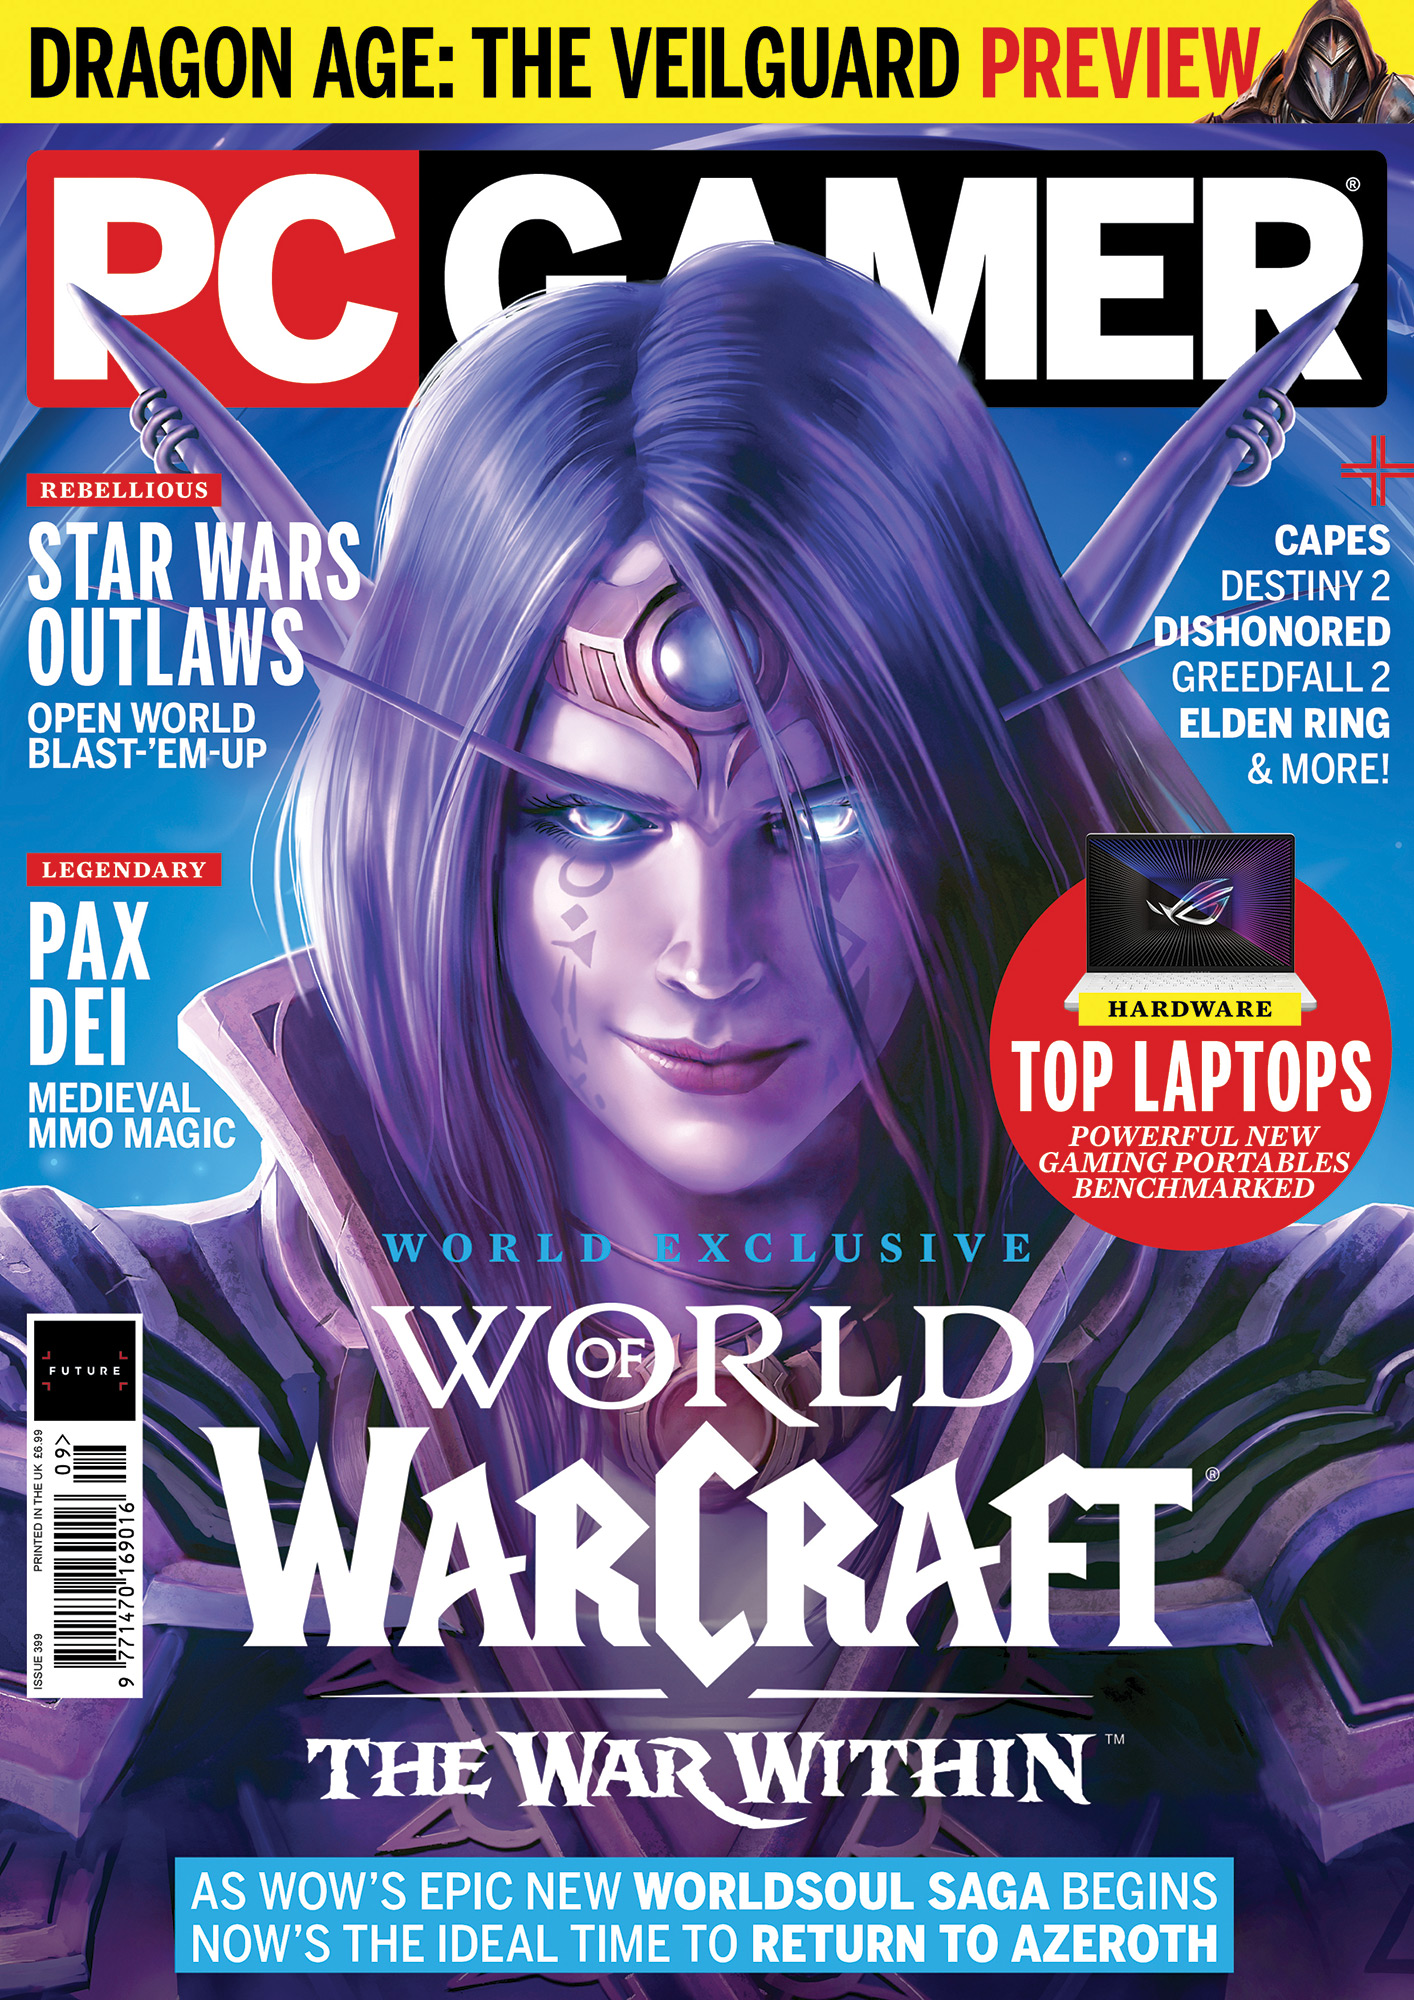 The cover of PC Gamer 399, showing an image of a World of Warcraft Dark Elf behind the words 